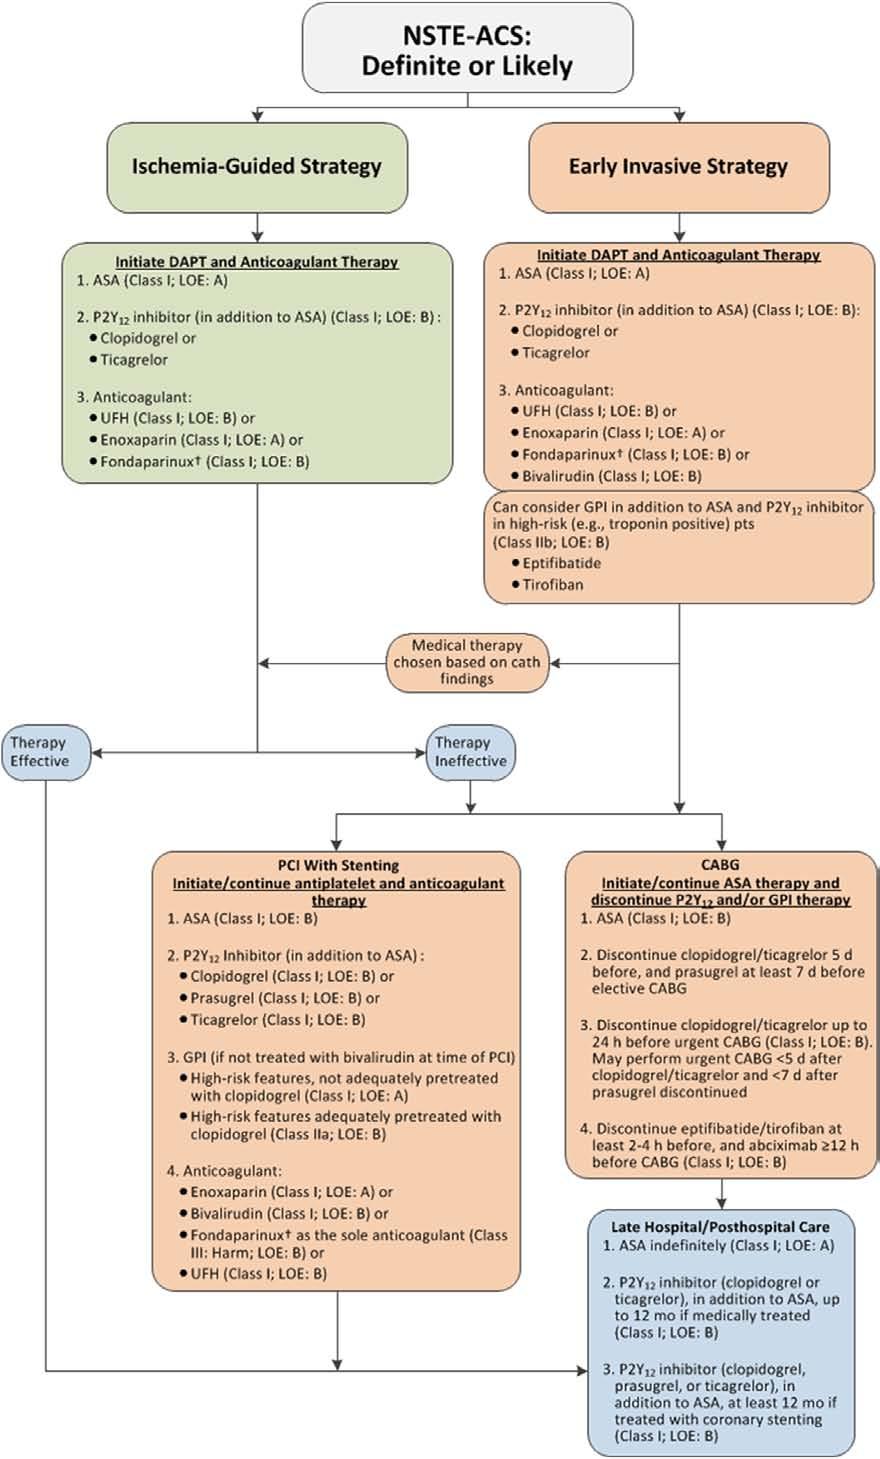 2368 Circulation December 23/30, 2014 Downloaded from http://circ.ahajournals.org/ by guest on May 3, 2018 Figure 3. Algorithm for Management of Patients With Definite or Likely NSTE-ACS*.